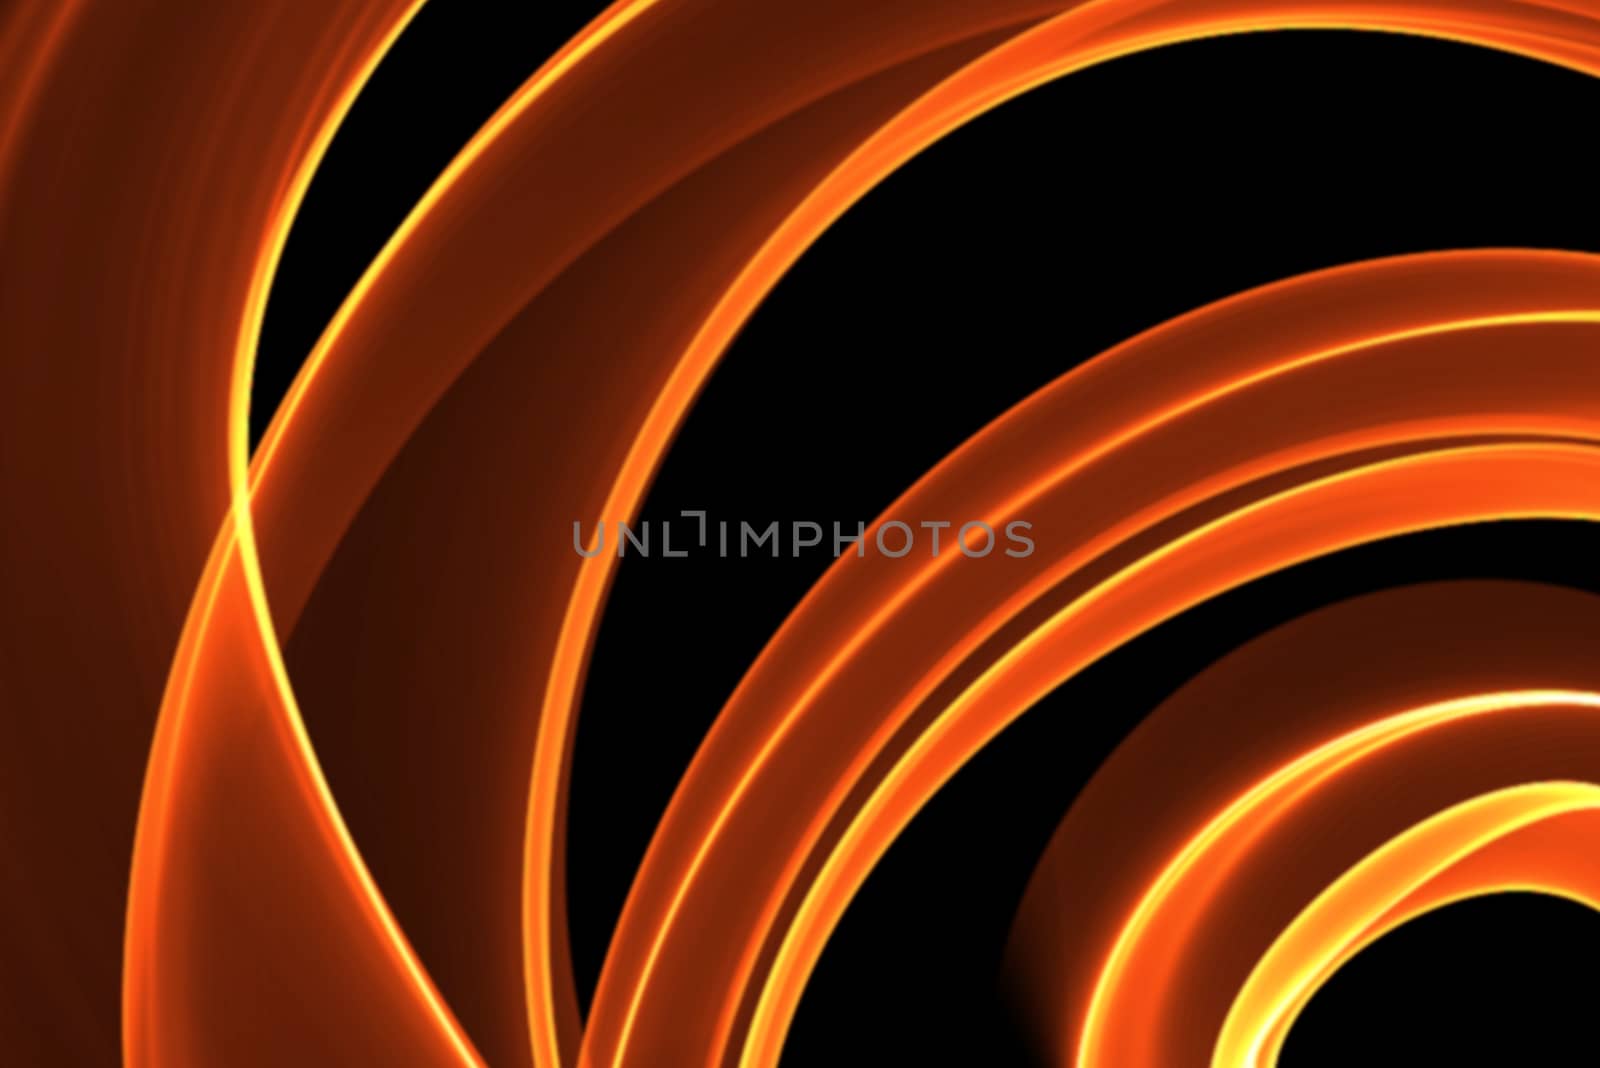 abstract red wavy smoke flame over black background by skrotov